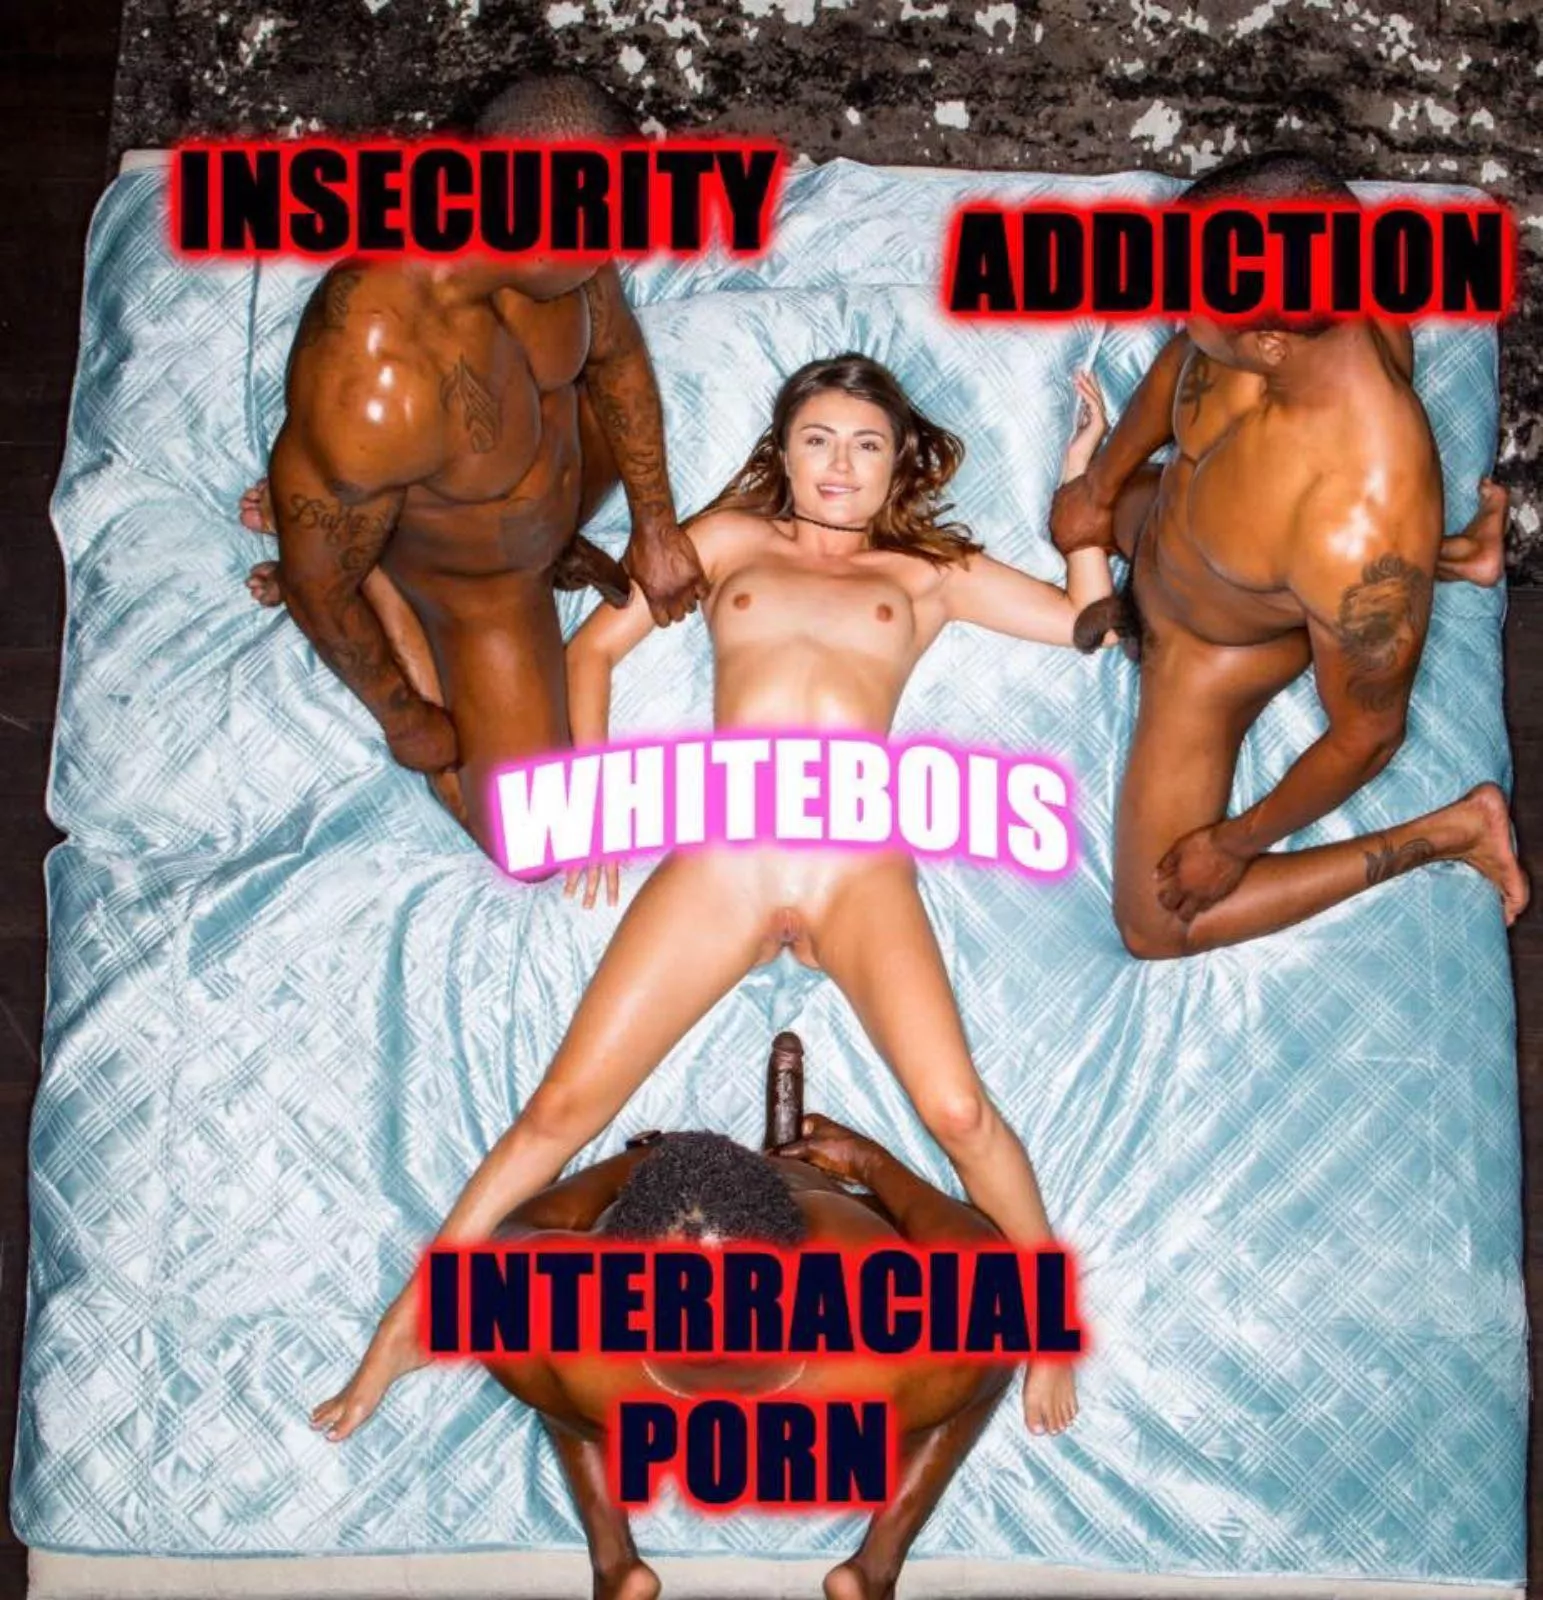 Interracial Virgin Gallery - I used to be a borderline white nationalist, now I'm an 19 year old virgin  who can only cum to BBCâ€¦ What happened? Kik: nuxyses nudes by ImmortalSaichi